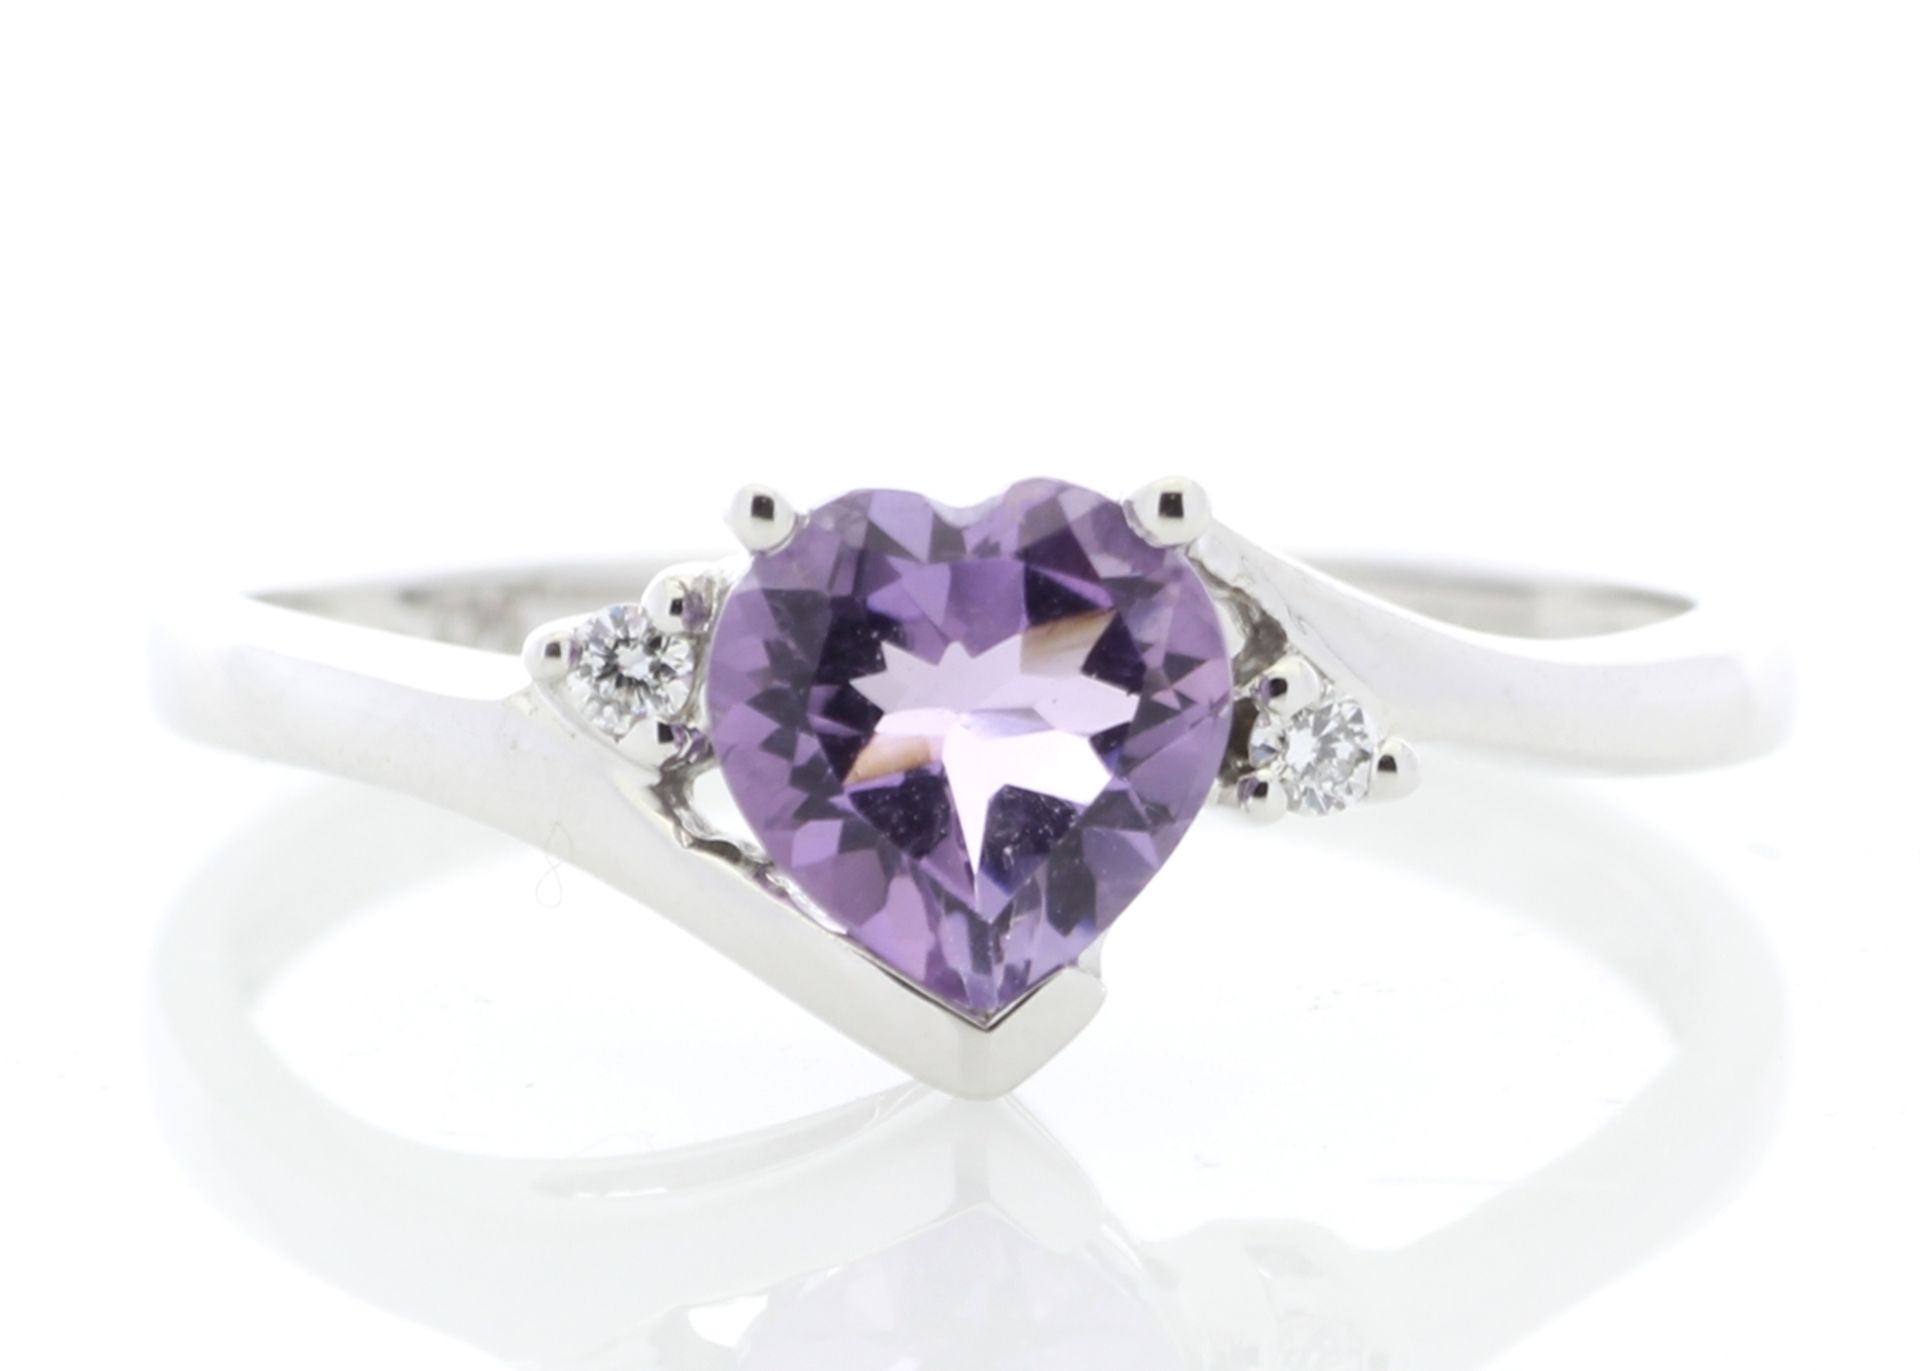 9ct White Gold Amethyst Diamond Ring (A0.68) 0.04 Carats